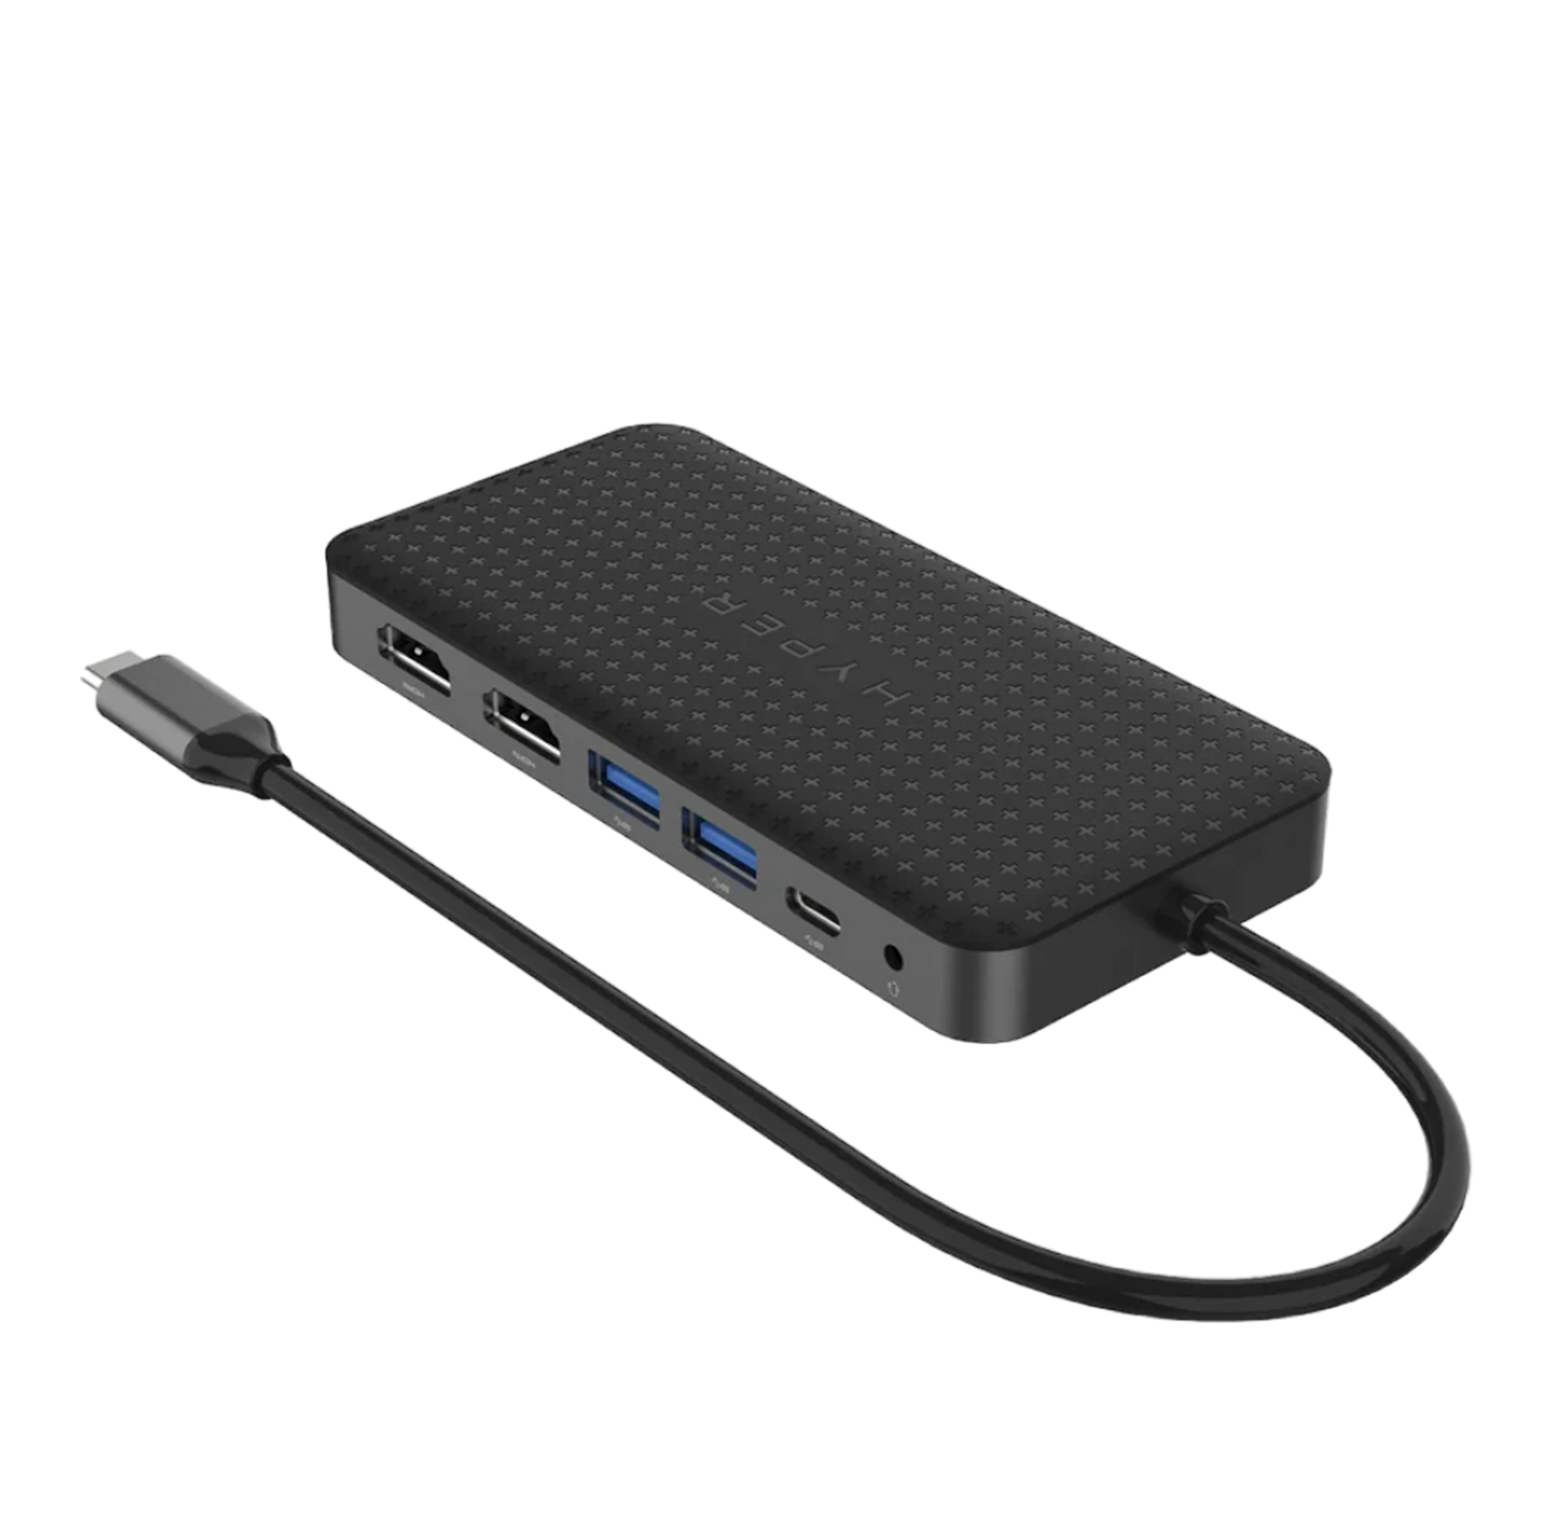 HyperDrive Dual HDMI 10-in-1 Travel Dock for M1 MacBook (Silicon Motion)